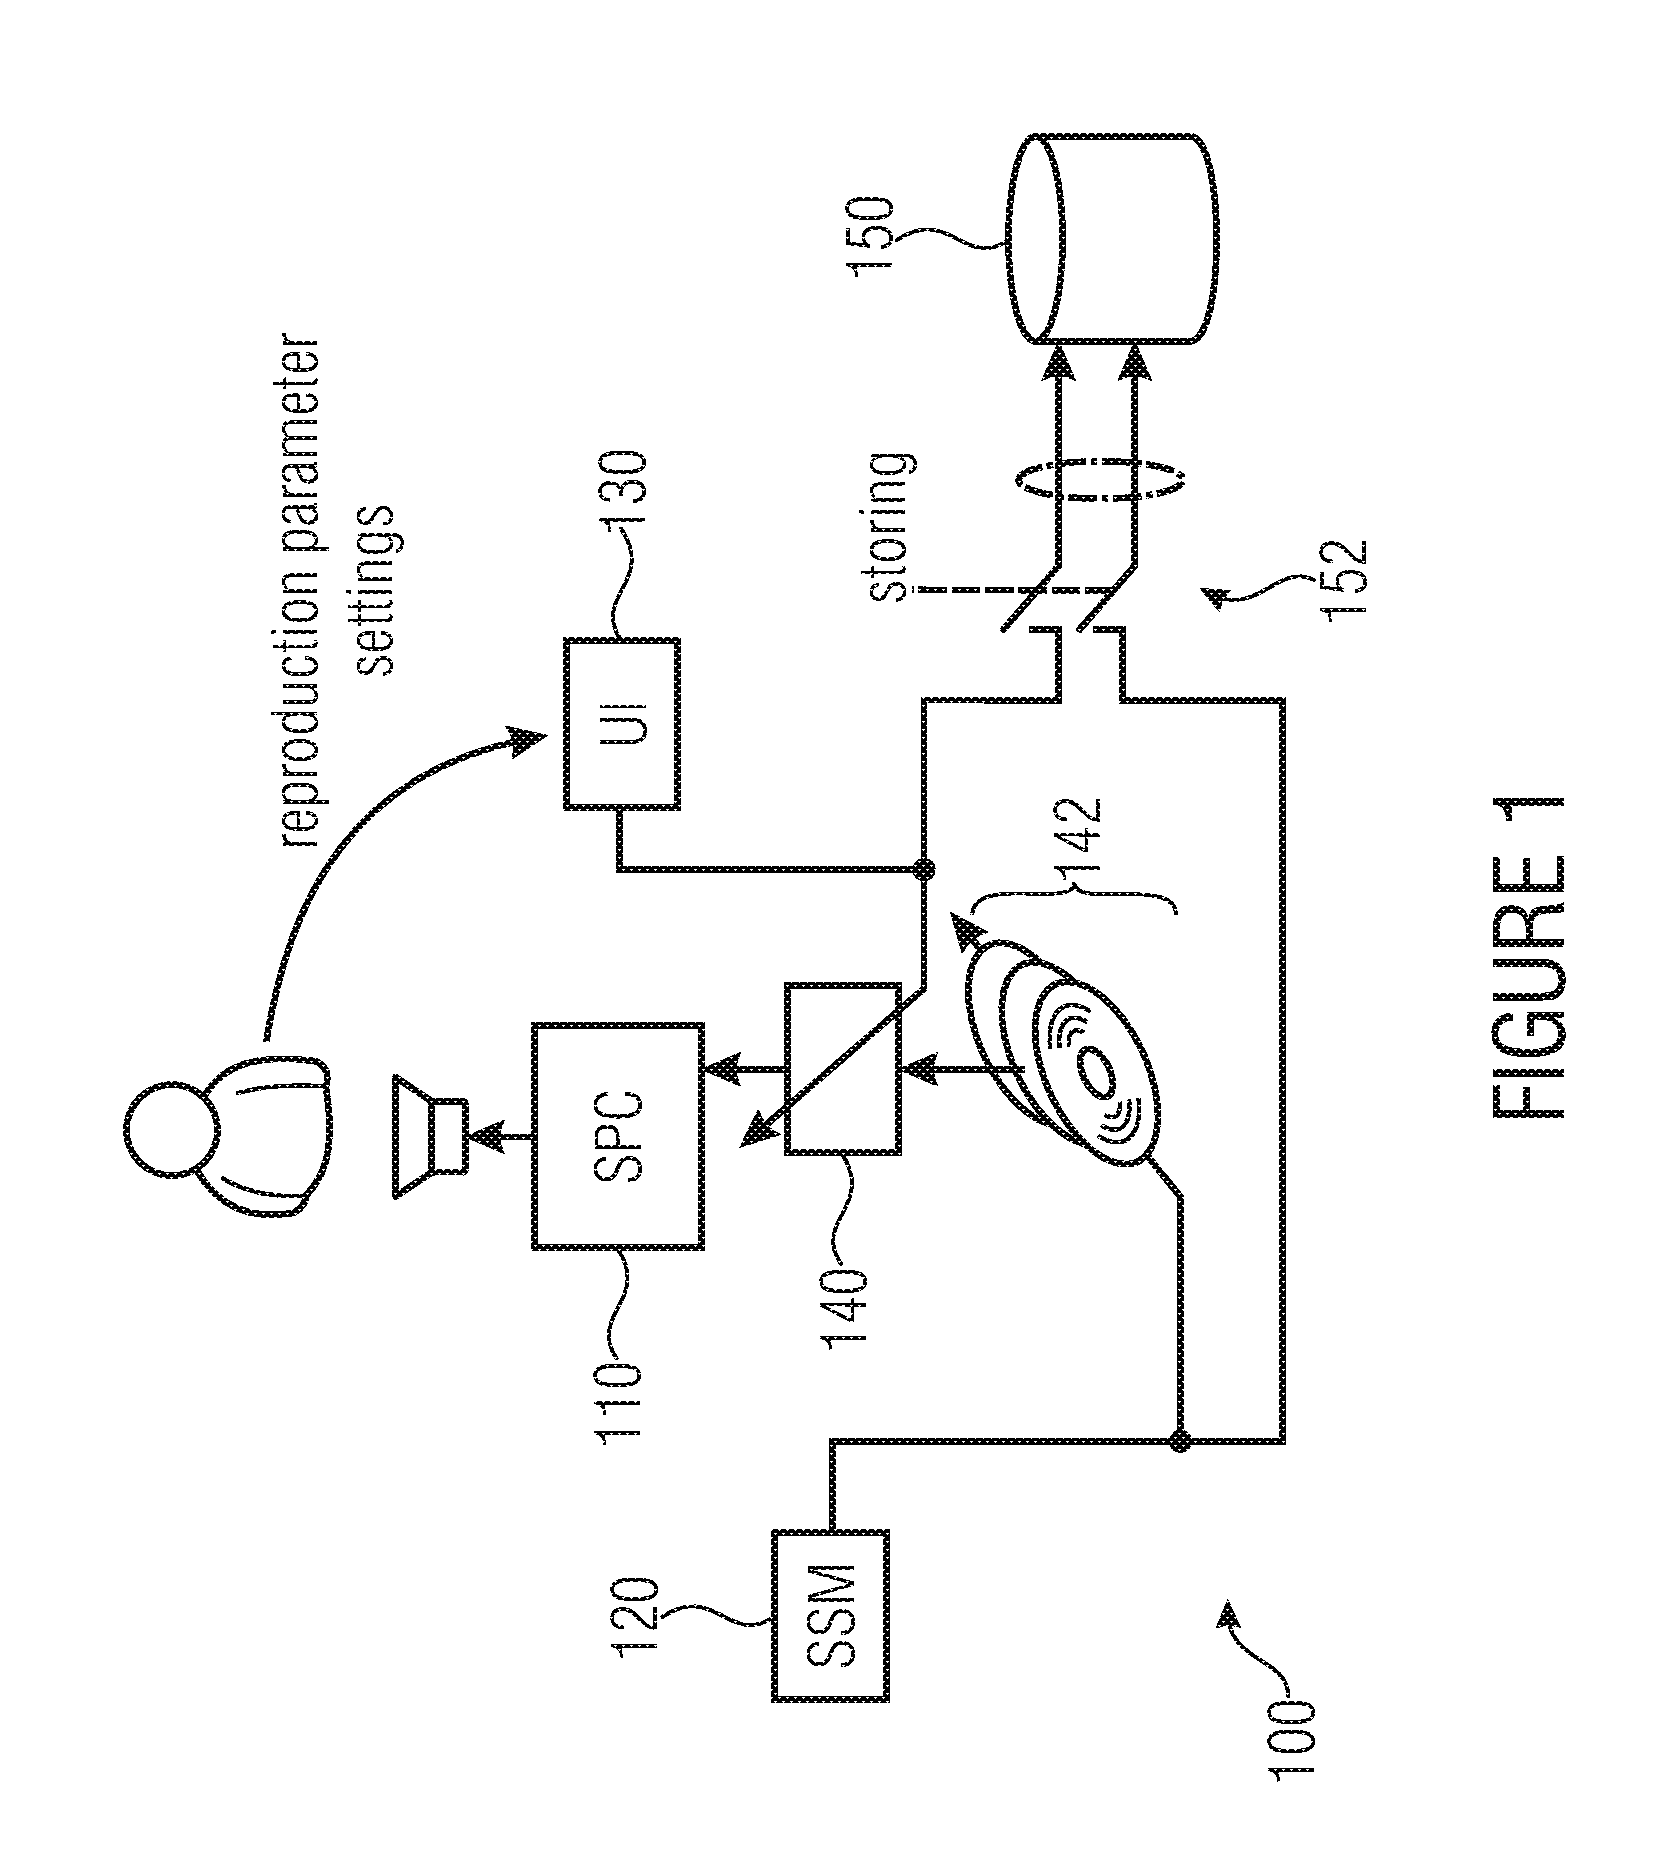 Sound reproduction device including auditory scenario simulation